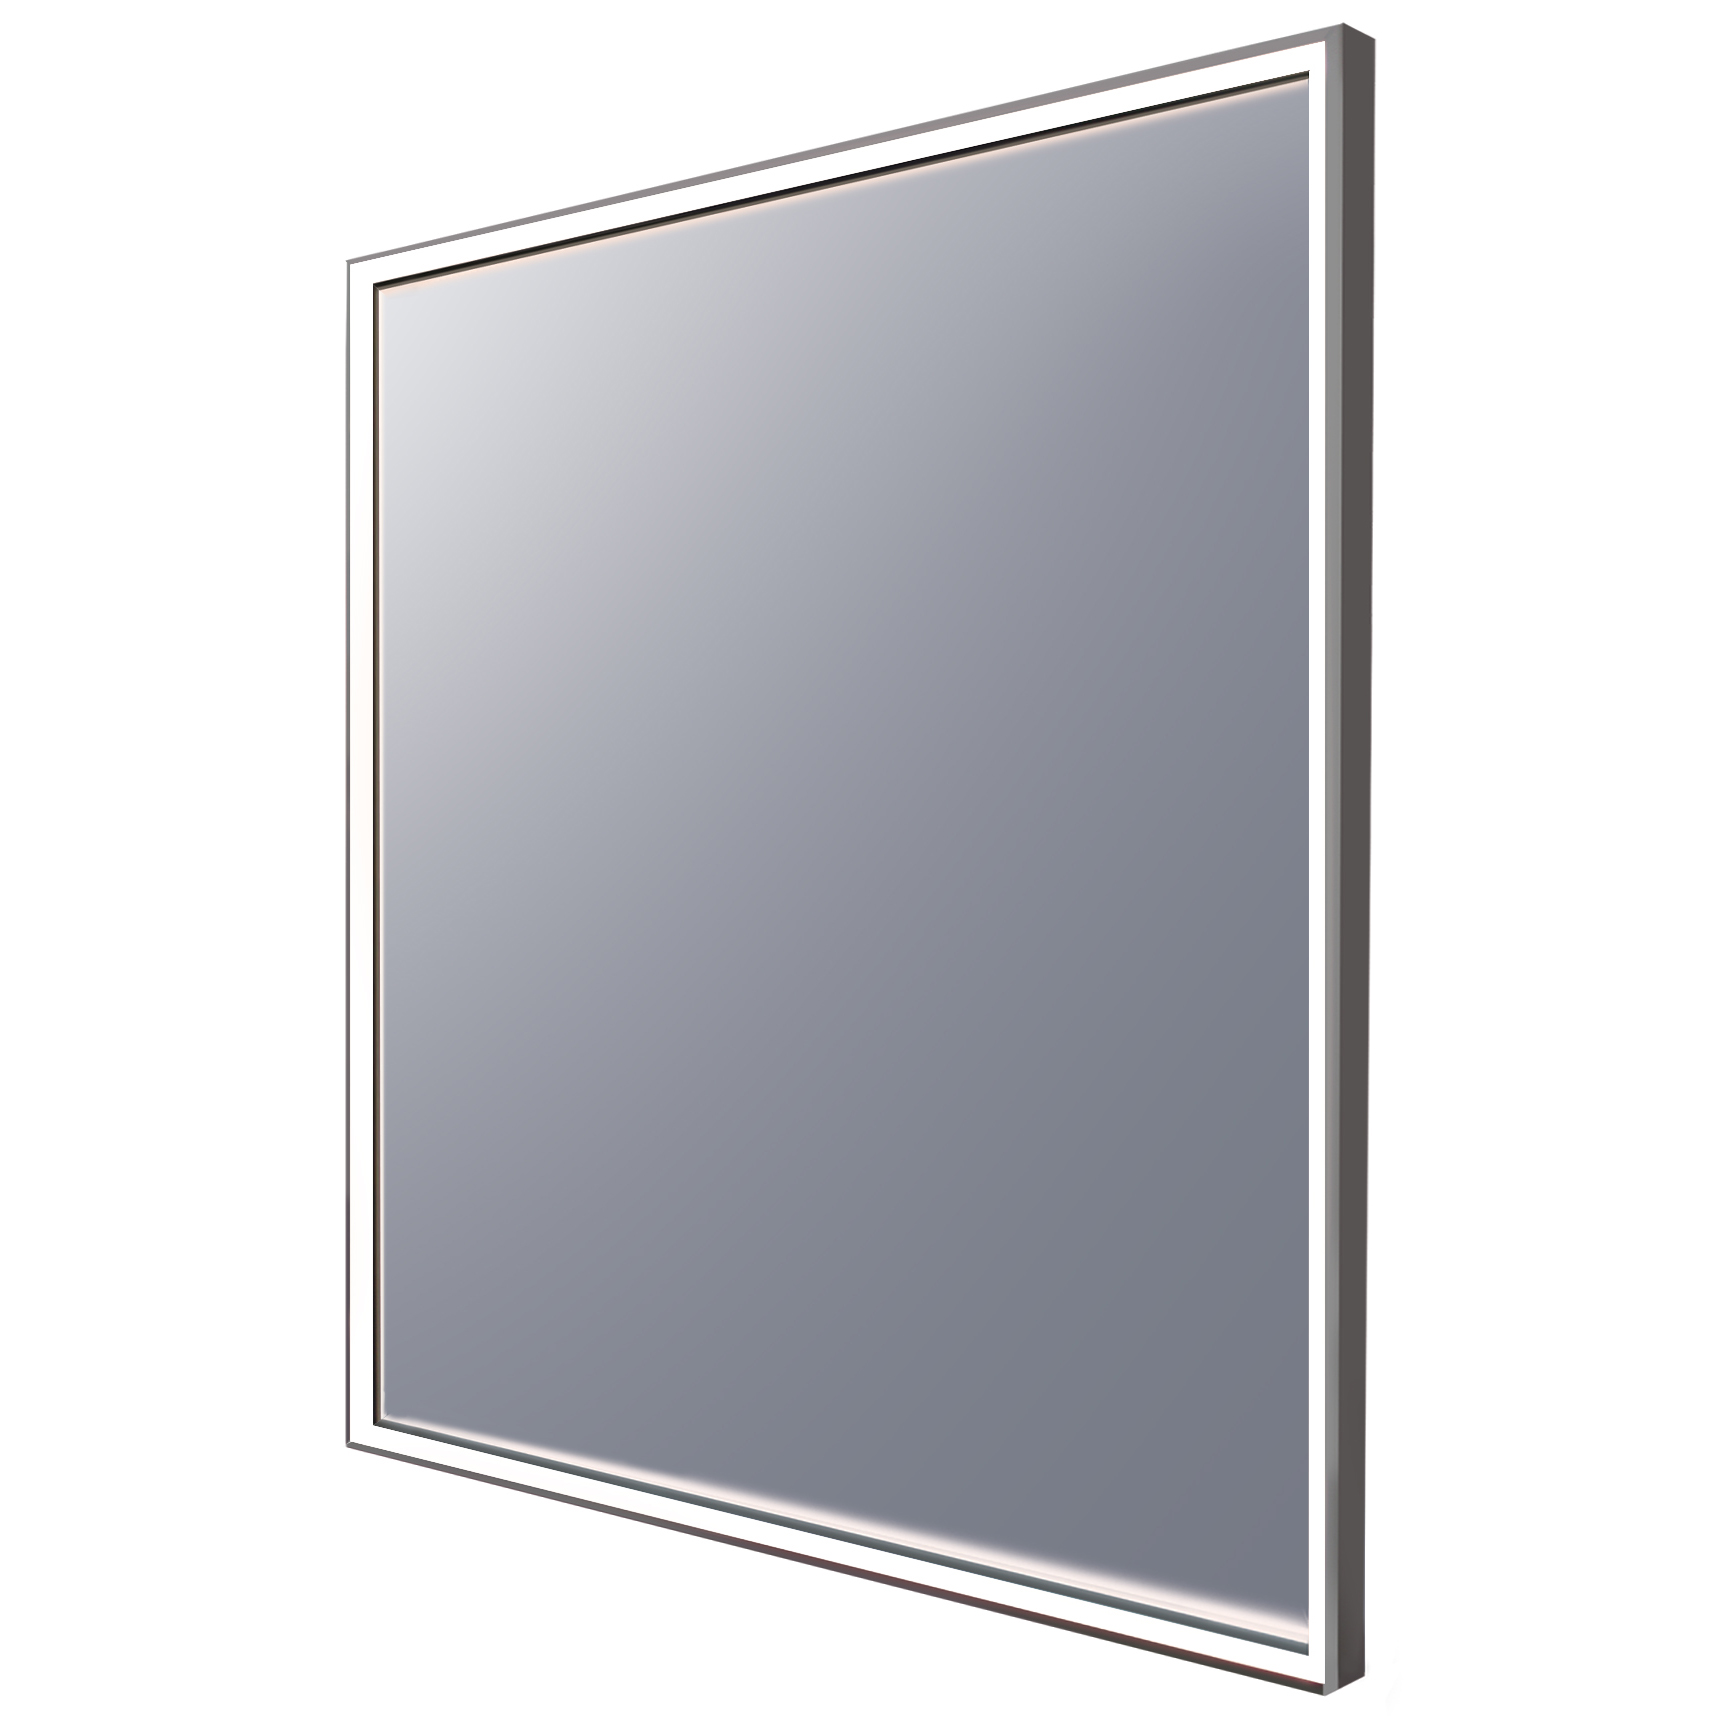 Radiance Lighted Mirror by Electric Mirror | RADP-3434 | EMR615388